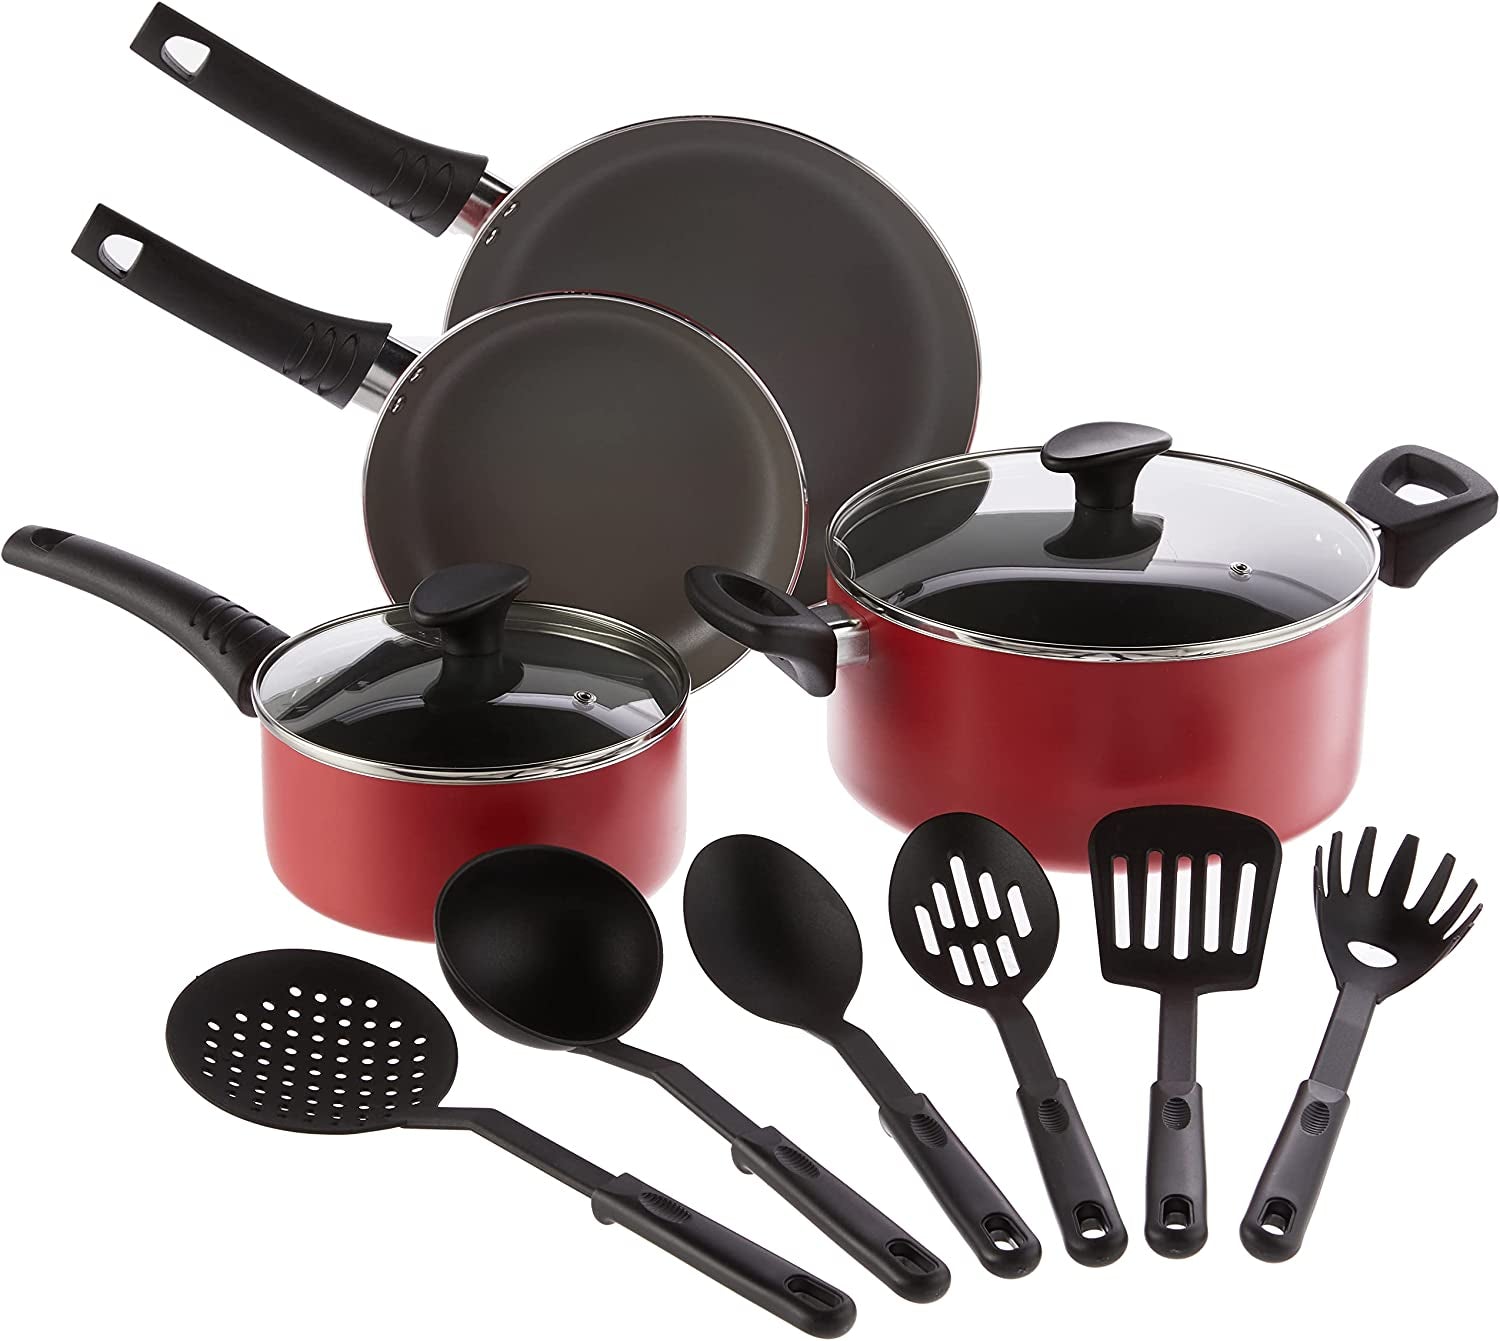 12-Piece Cookware Set with Utensils, Nonstick Scratch Resistant Cooking Surface, Compatible with All Stoves, Nylon and Aluminum Construction, Red